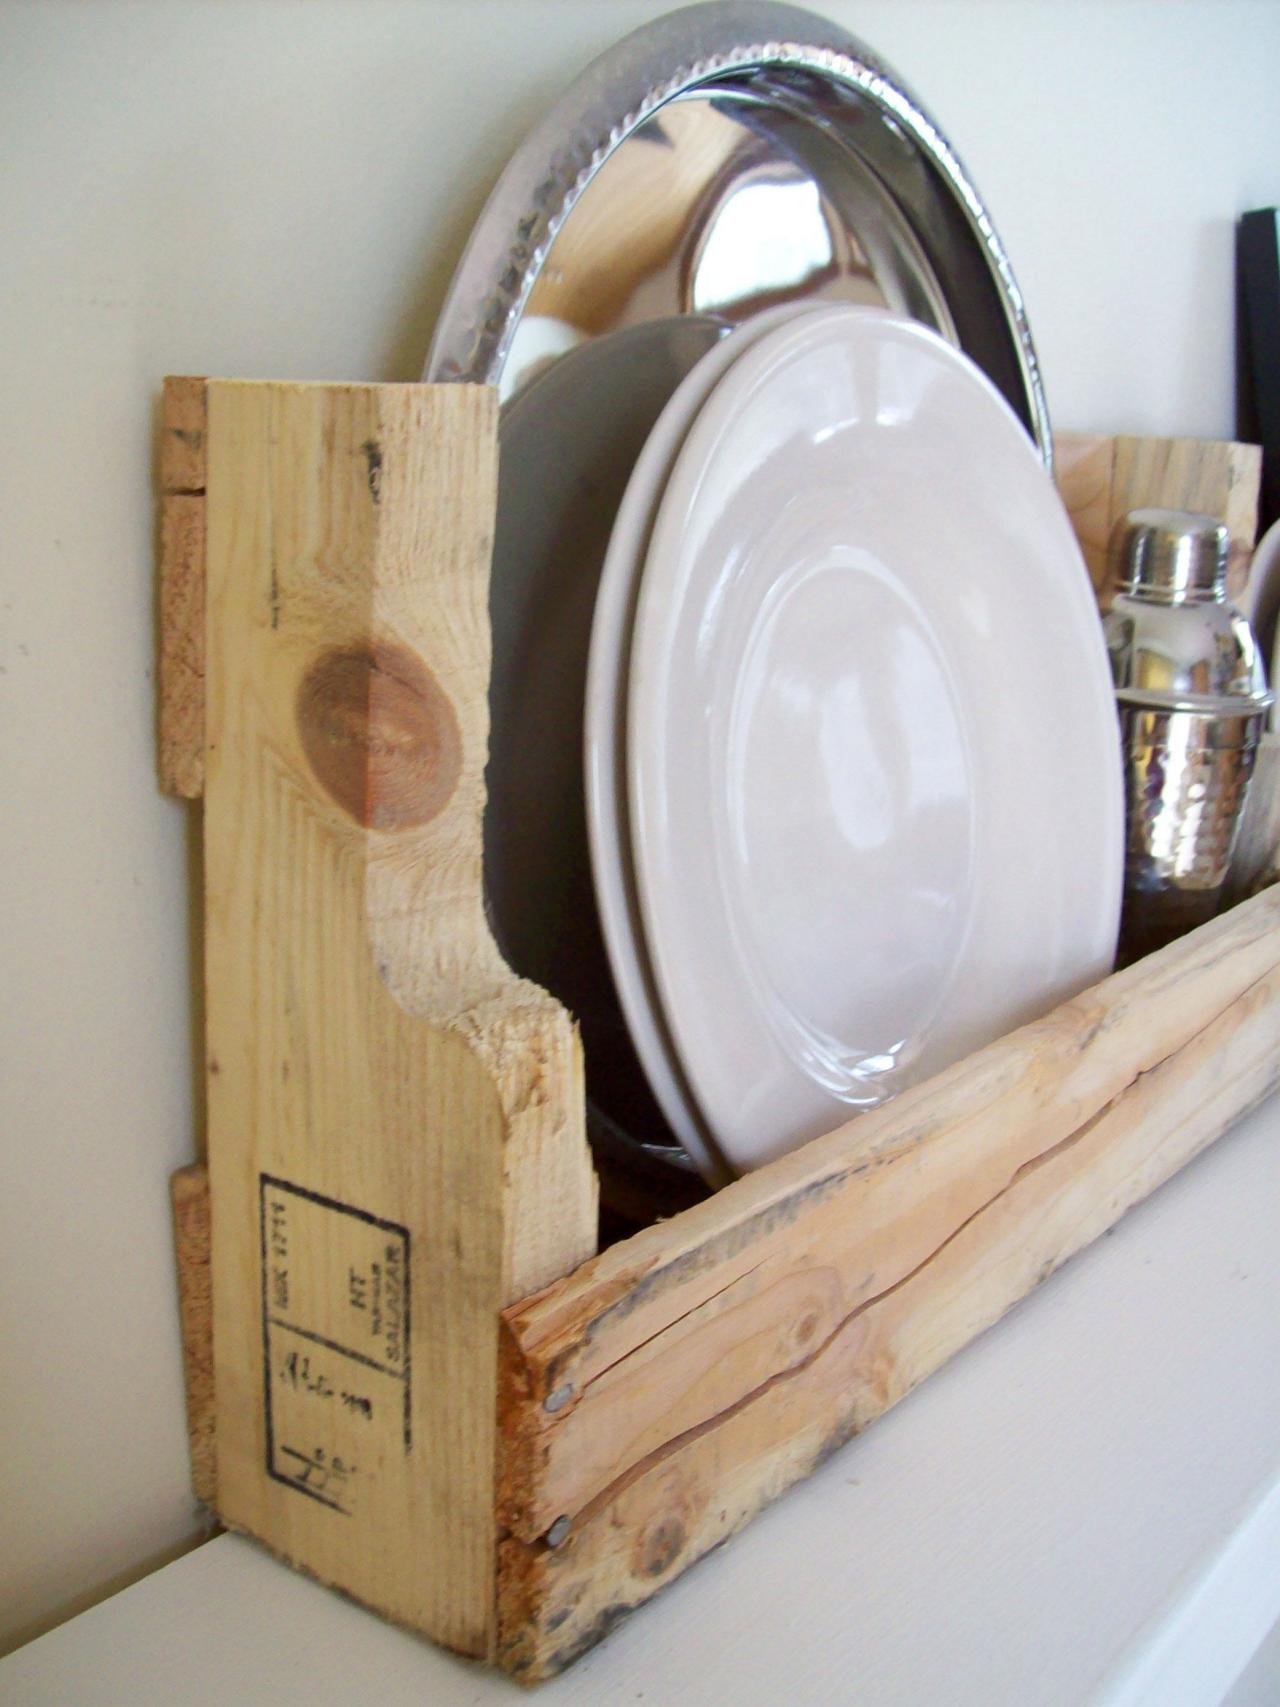 Kitchen Rules Reclaimed Pallet Wood Sign 